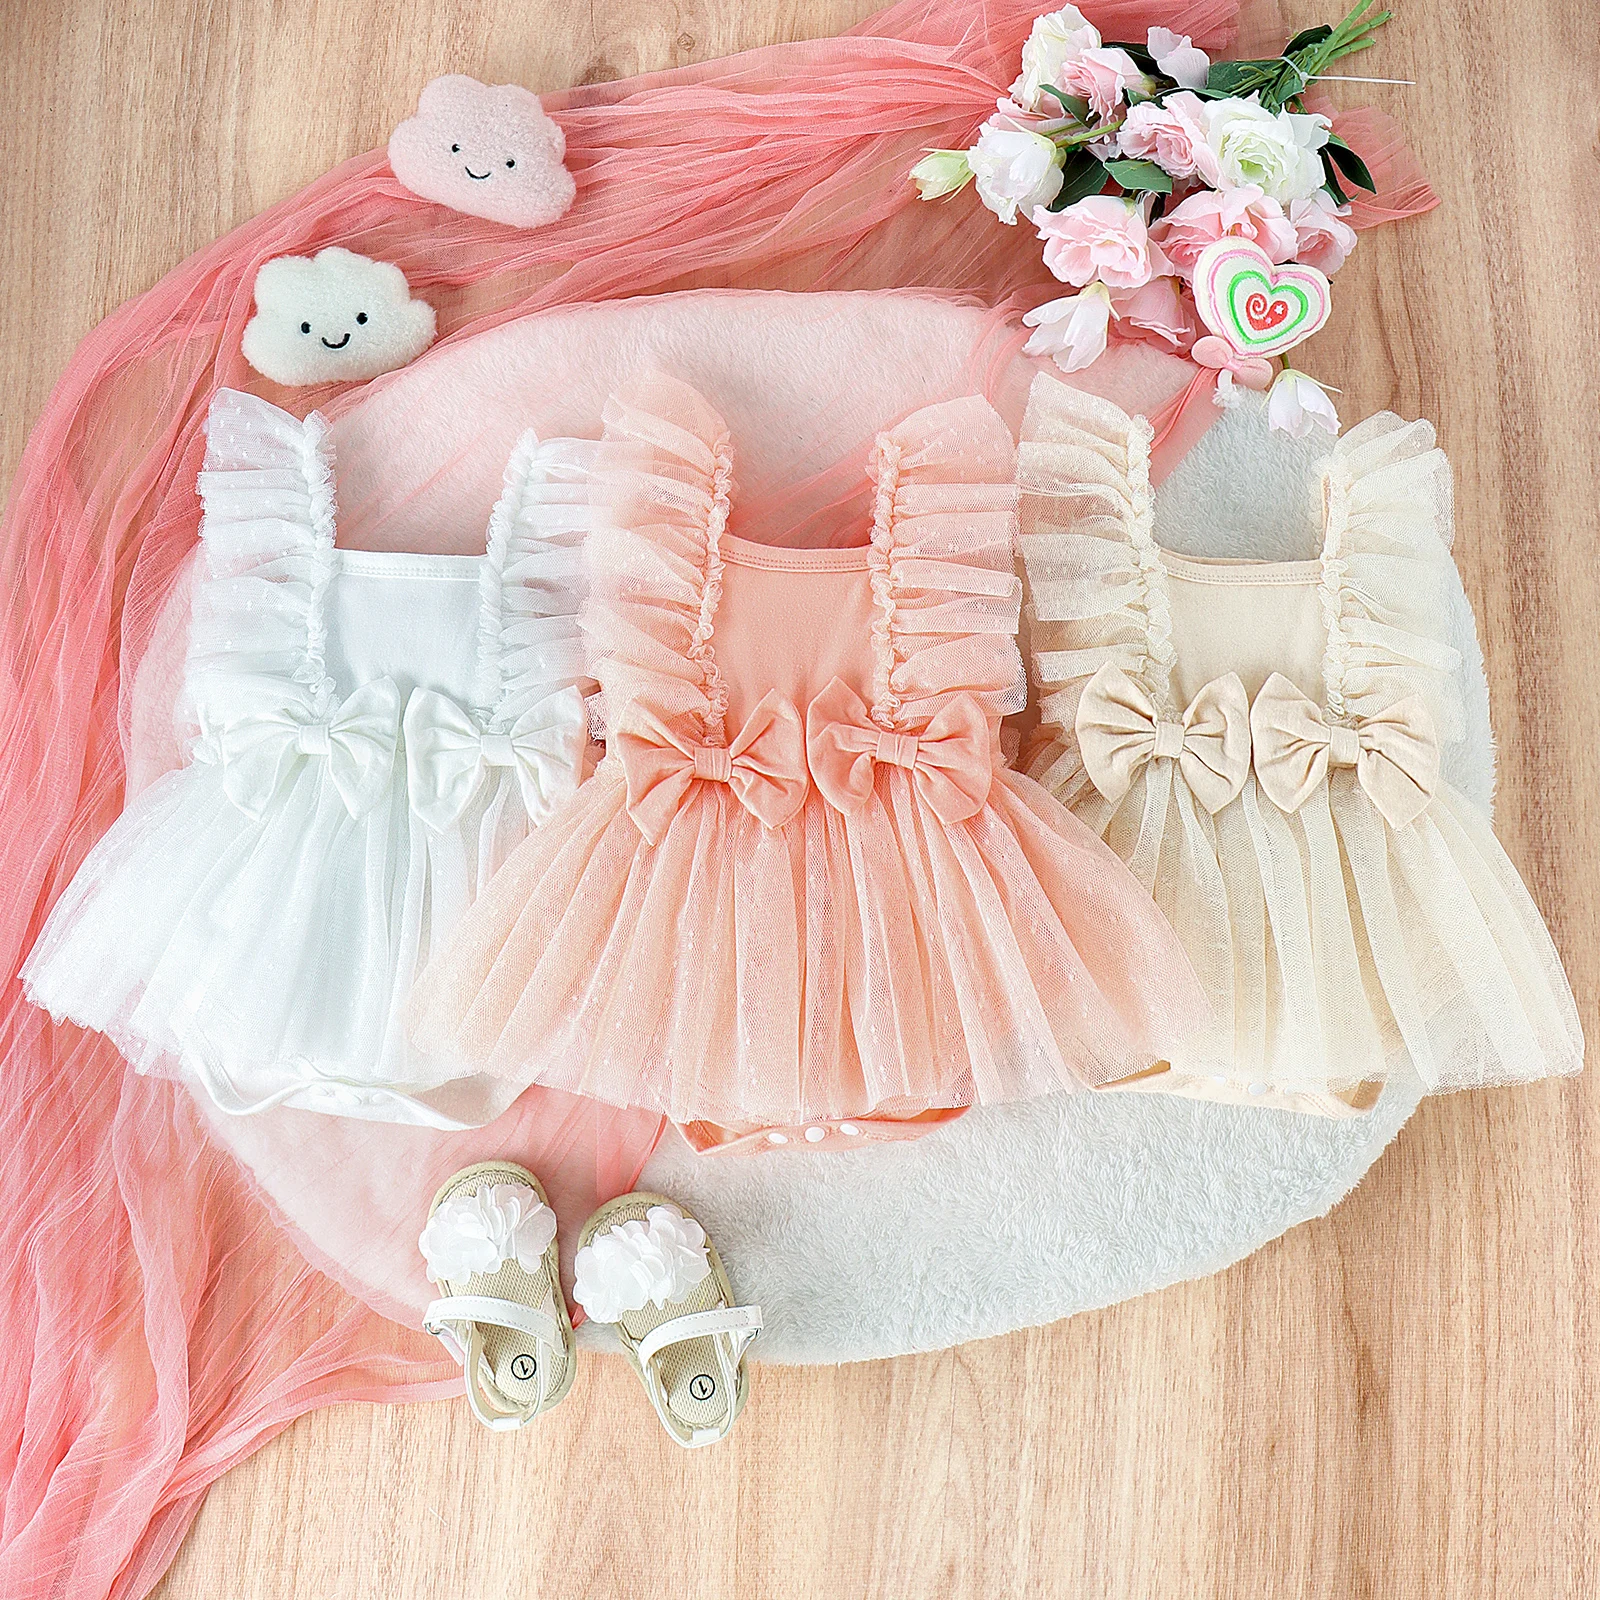 

Princess Infant Baby Girls Tulle Romper Dress Dot Print Flying Sleeve Square Neck Bow Lace Bodyuits Jumpsuit Sunsuits